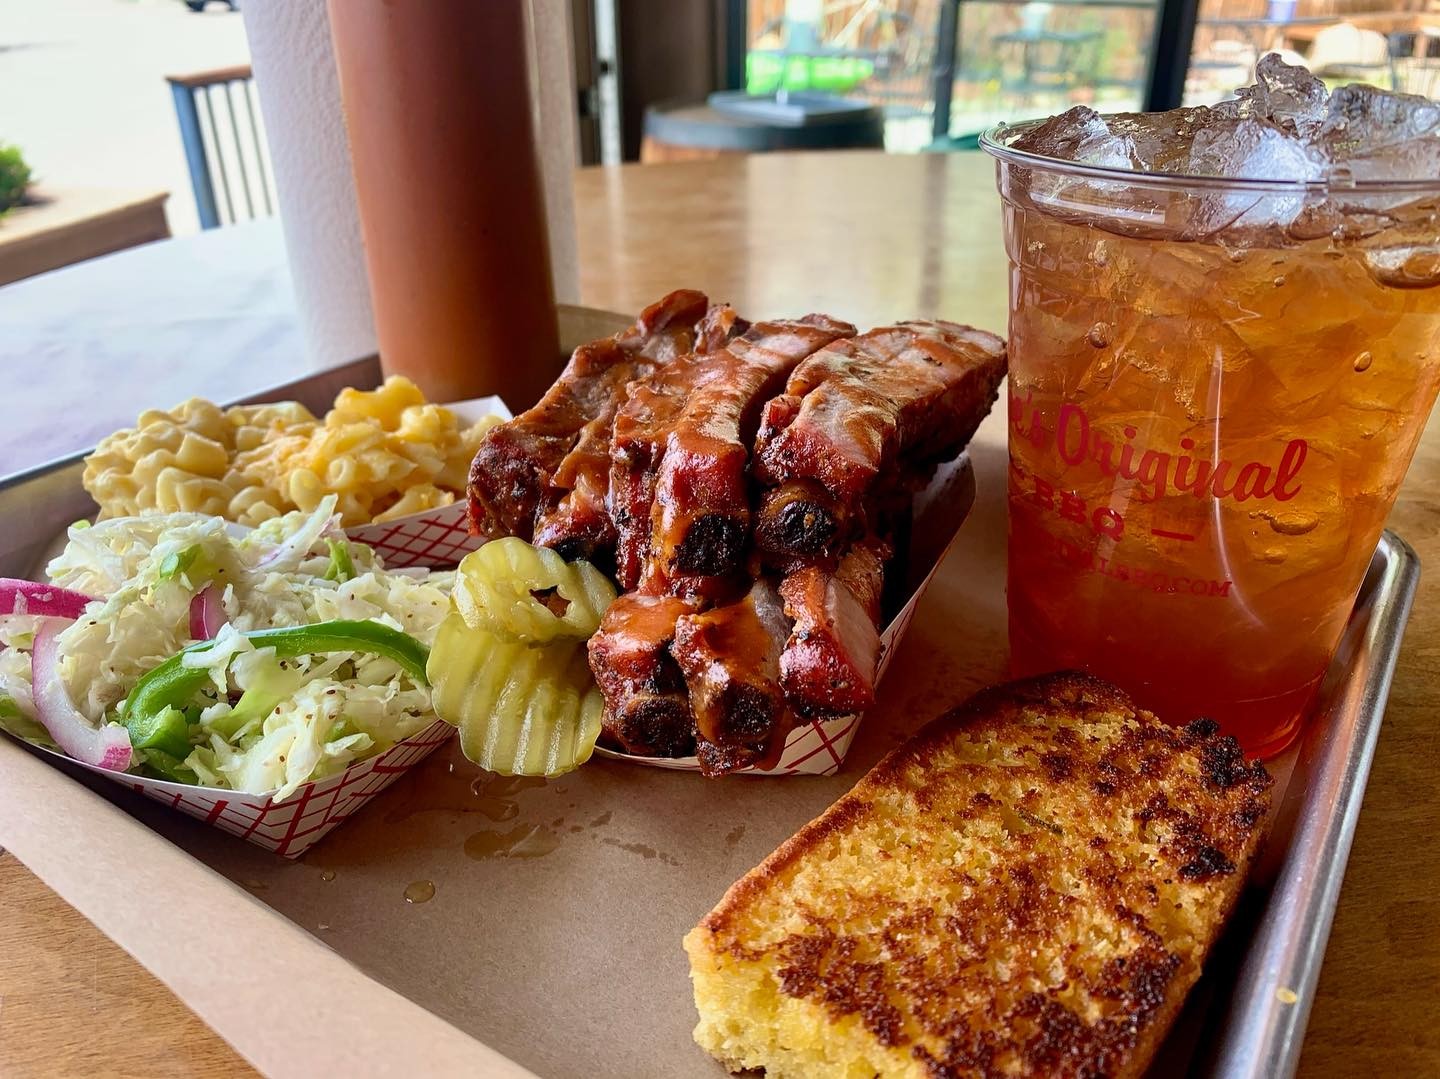 Coleslaw, mac and cheese, Texas toast, a slab of barbecue ribs and an ice cold sweet tea from Moe’s Original BBQ. 